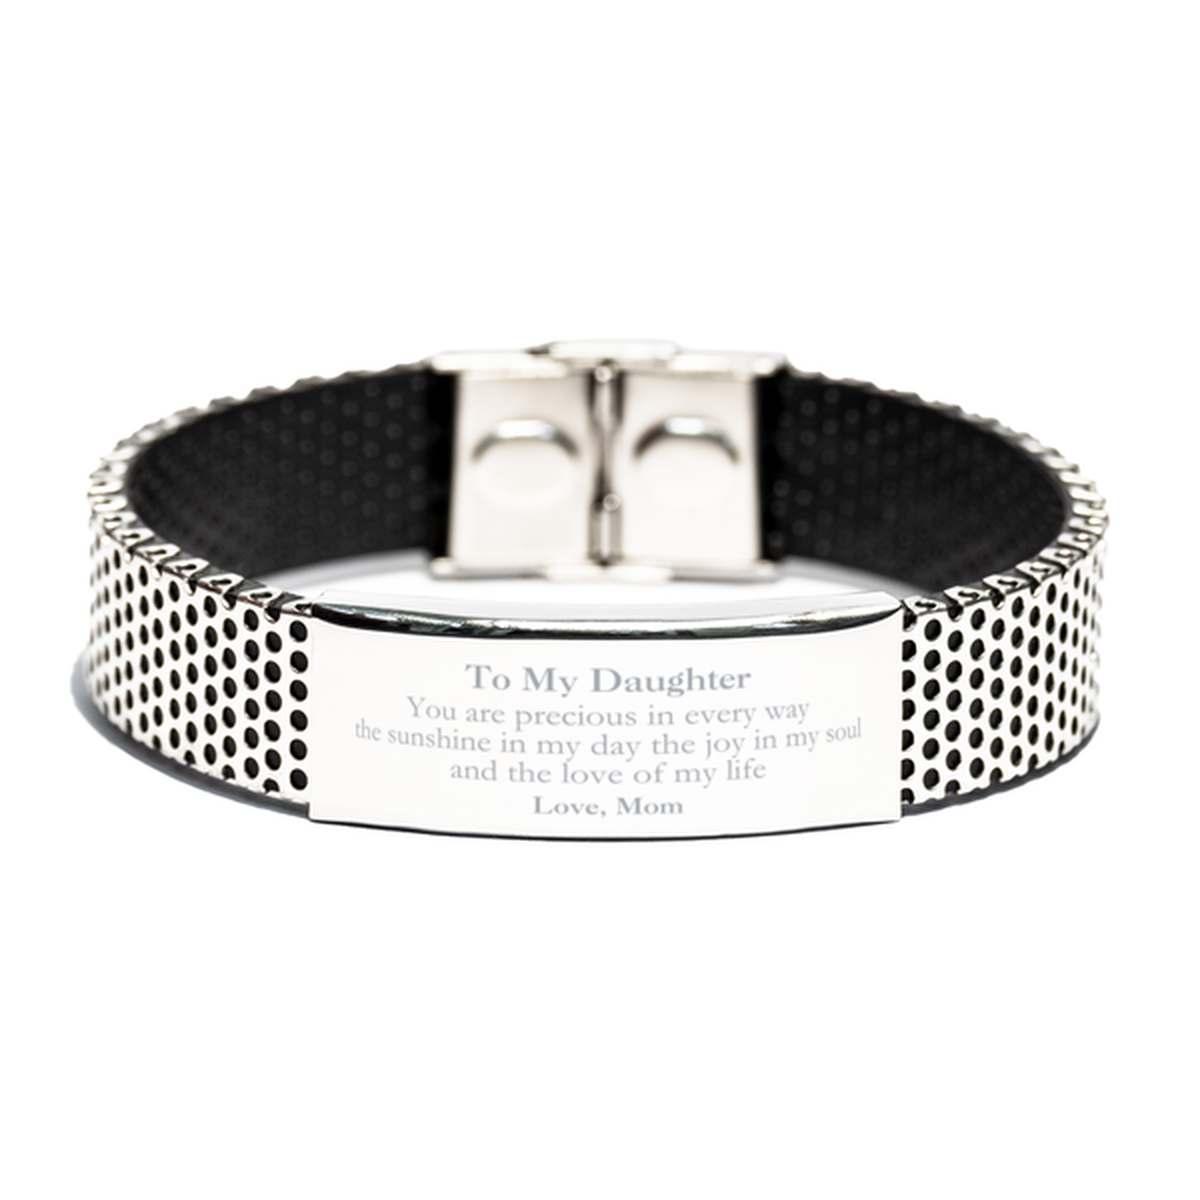 Graduation Gifts for Daughter Stainless Steel Bracelet Present from Mom, Christmas Daughter Birthday Gifts Daughter You are precious in every way the sunshine in my day. Love, Mom